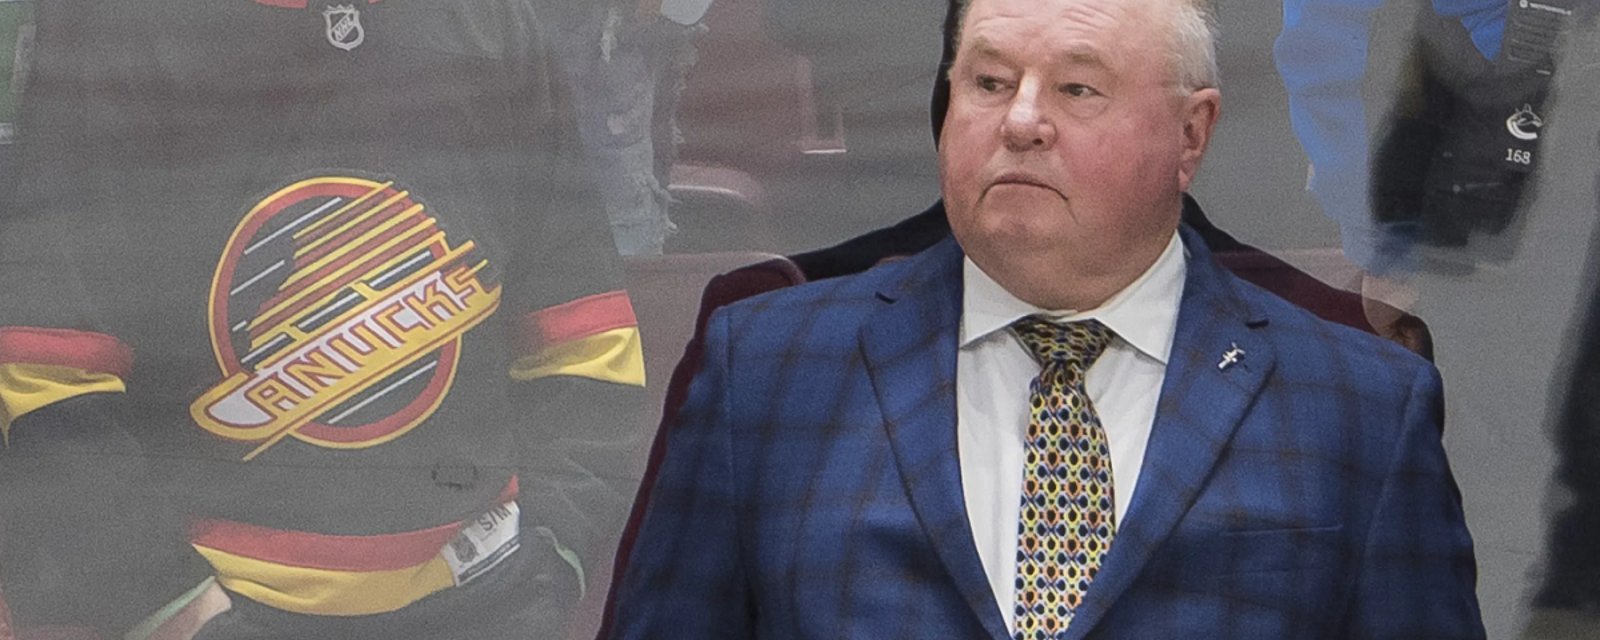 Bruce Boudreau takes a shot at Canucks' management in final post-game interview.